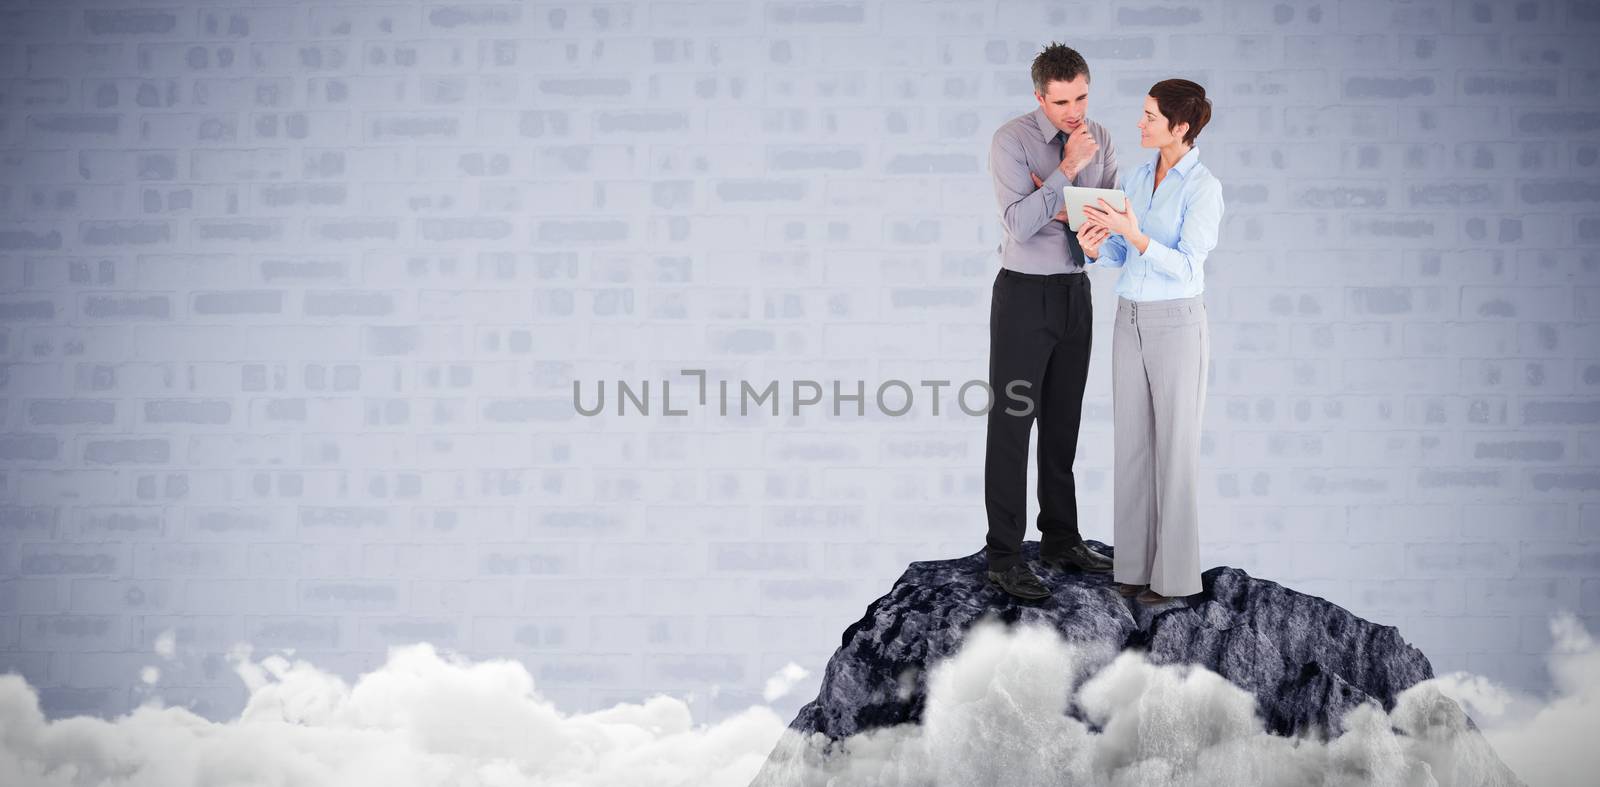 Business people discussing over tablet computer against blue brick background